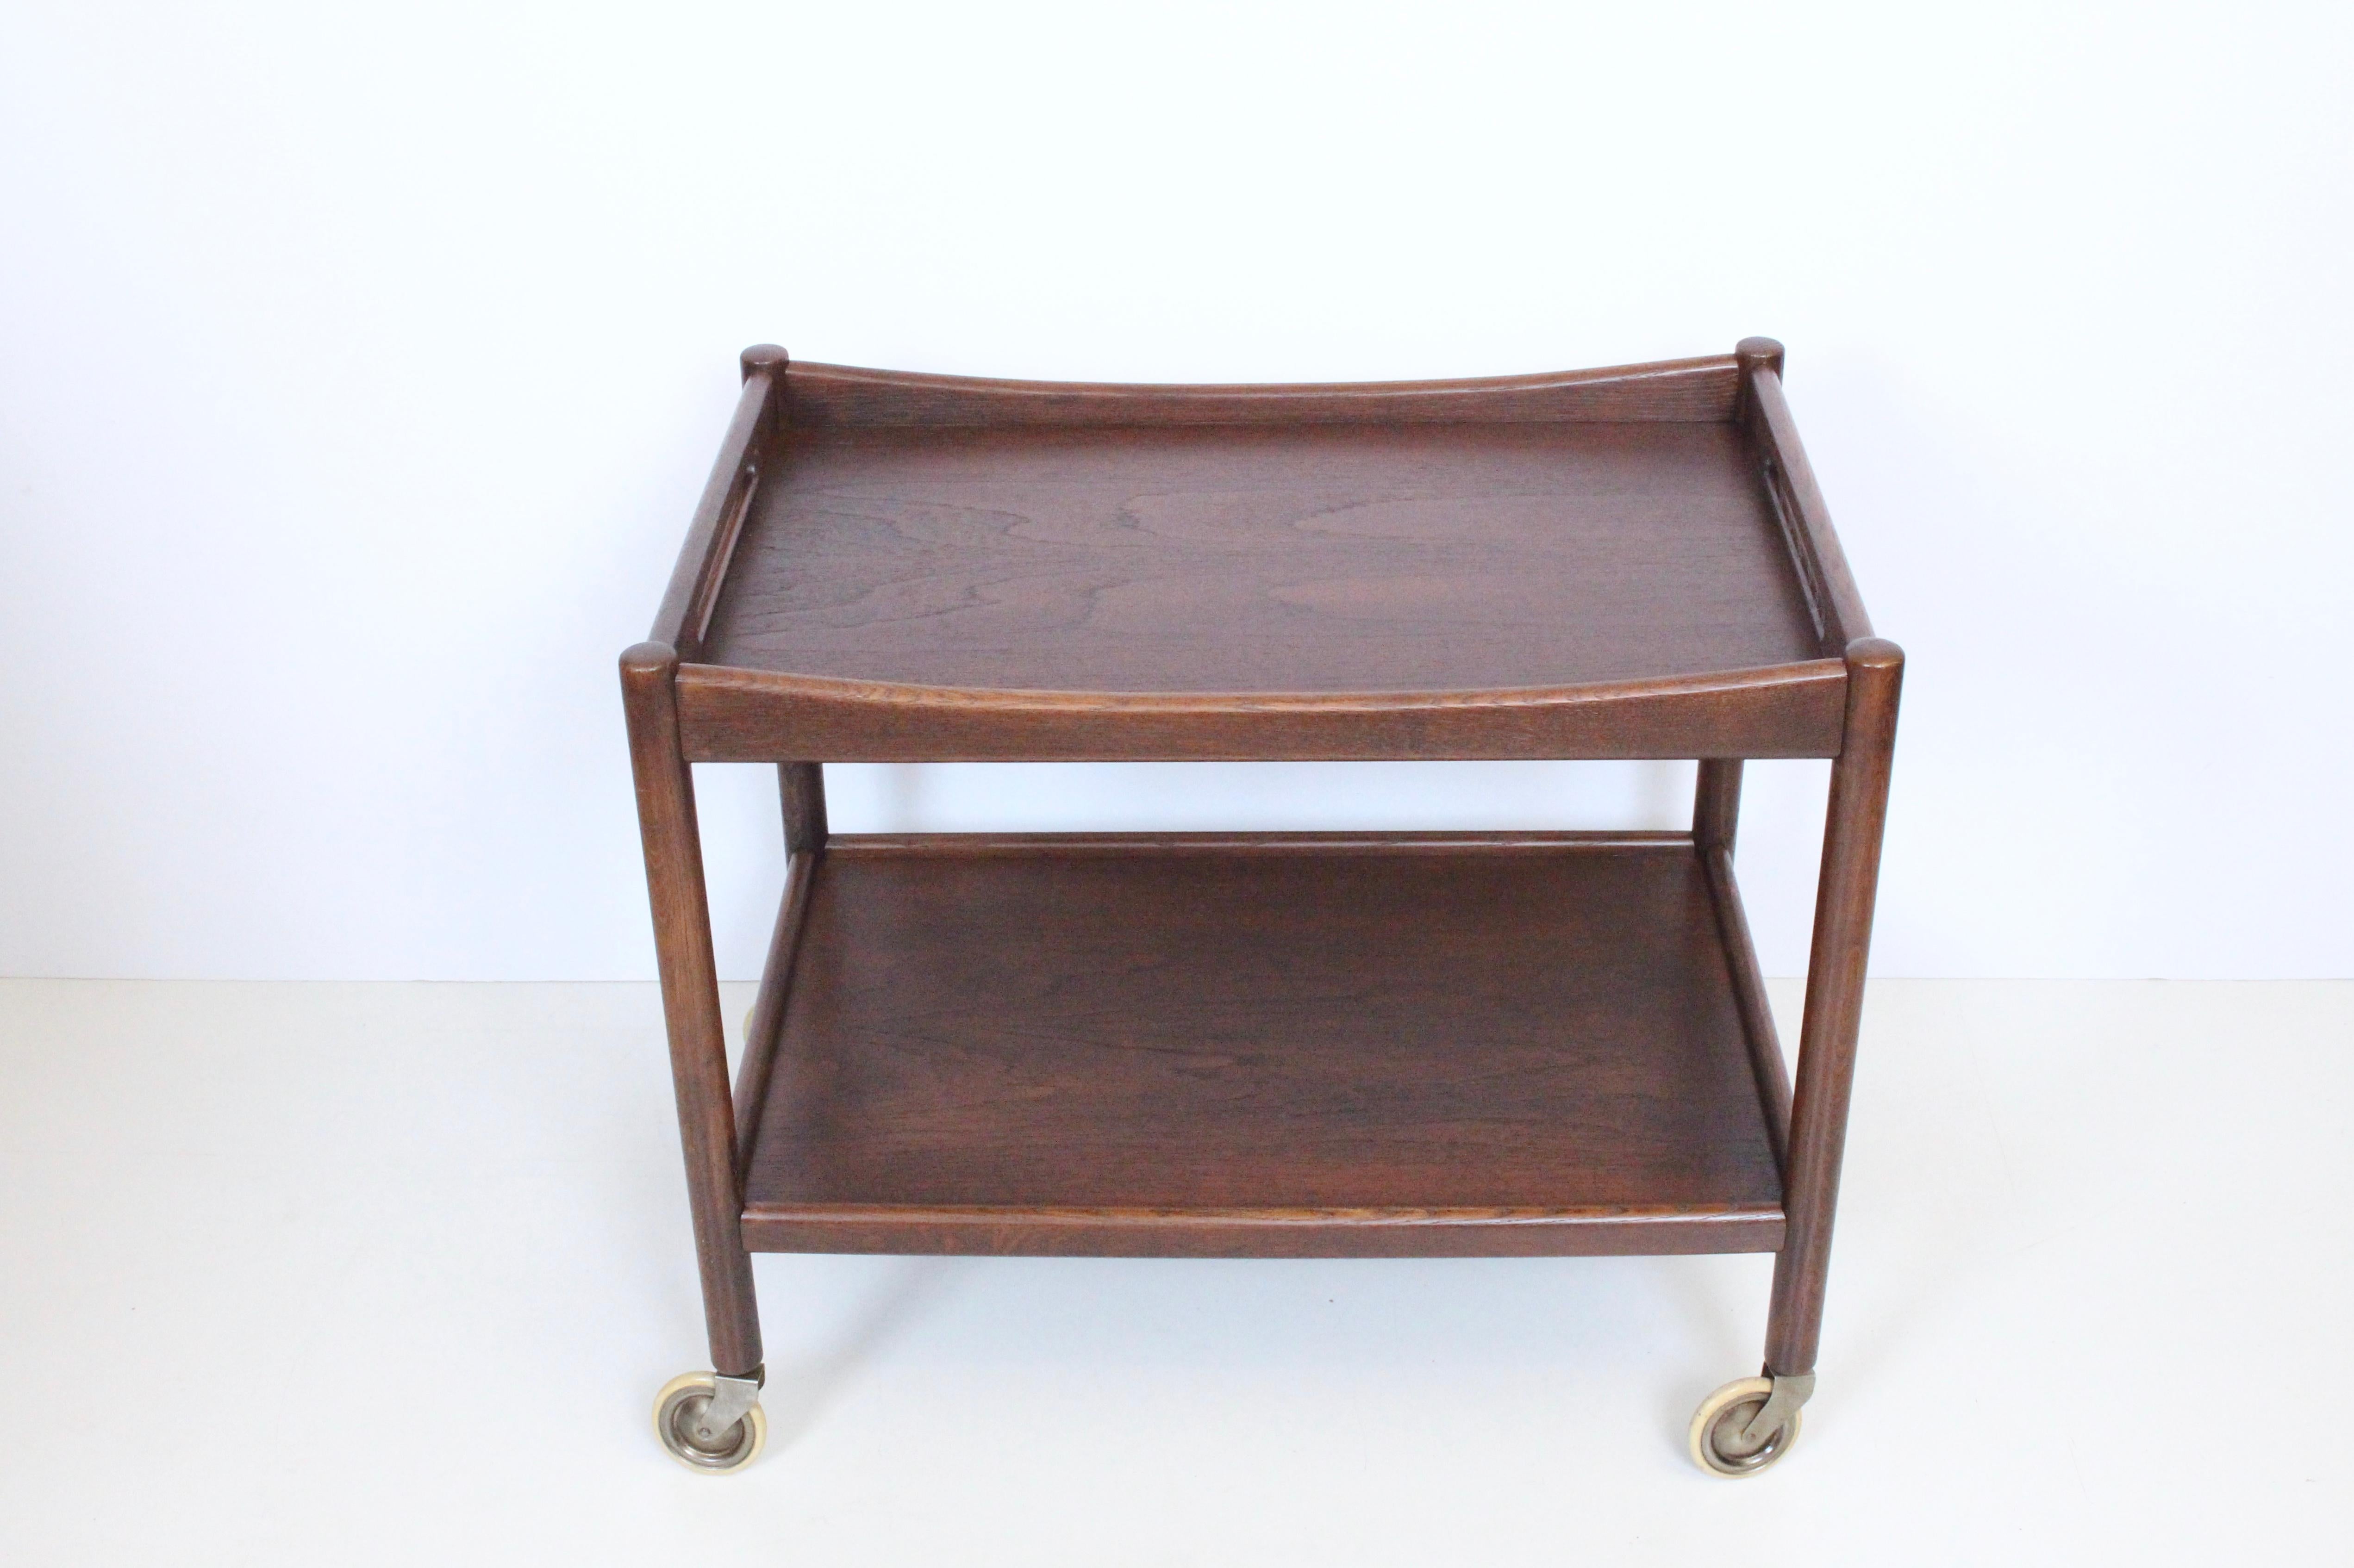 Hans Wegner for Andreas tuck rolling teak trolley, bar cart, tea cart, serving cart. Featuring an all teak rectangular lipped and handle Teak Tray with lipped lower shelf and original rubber tread to casters. Sturdy. Classic. Danish Modern. Stamped